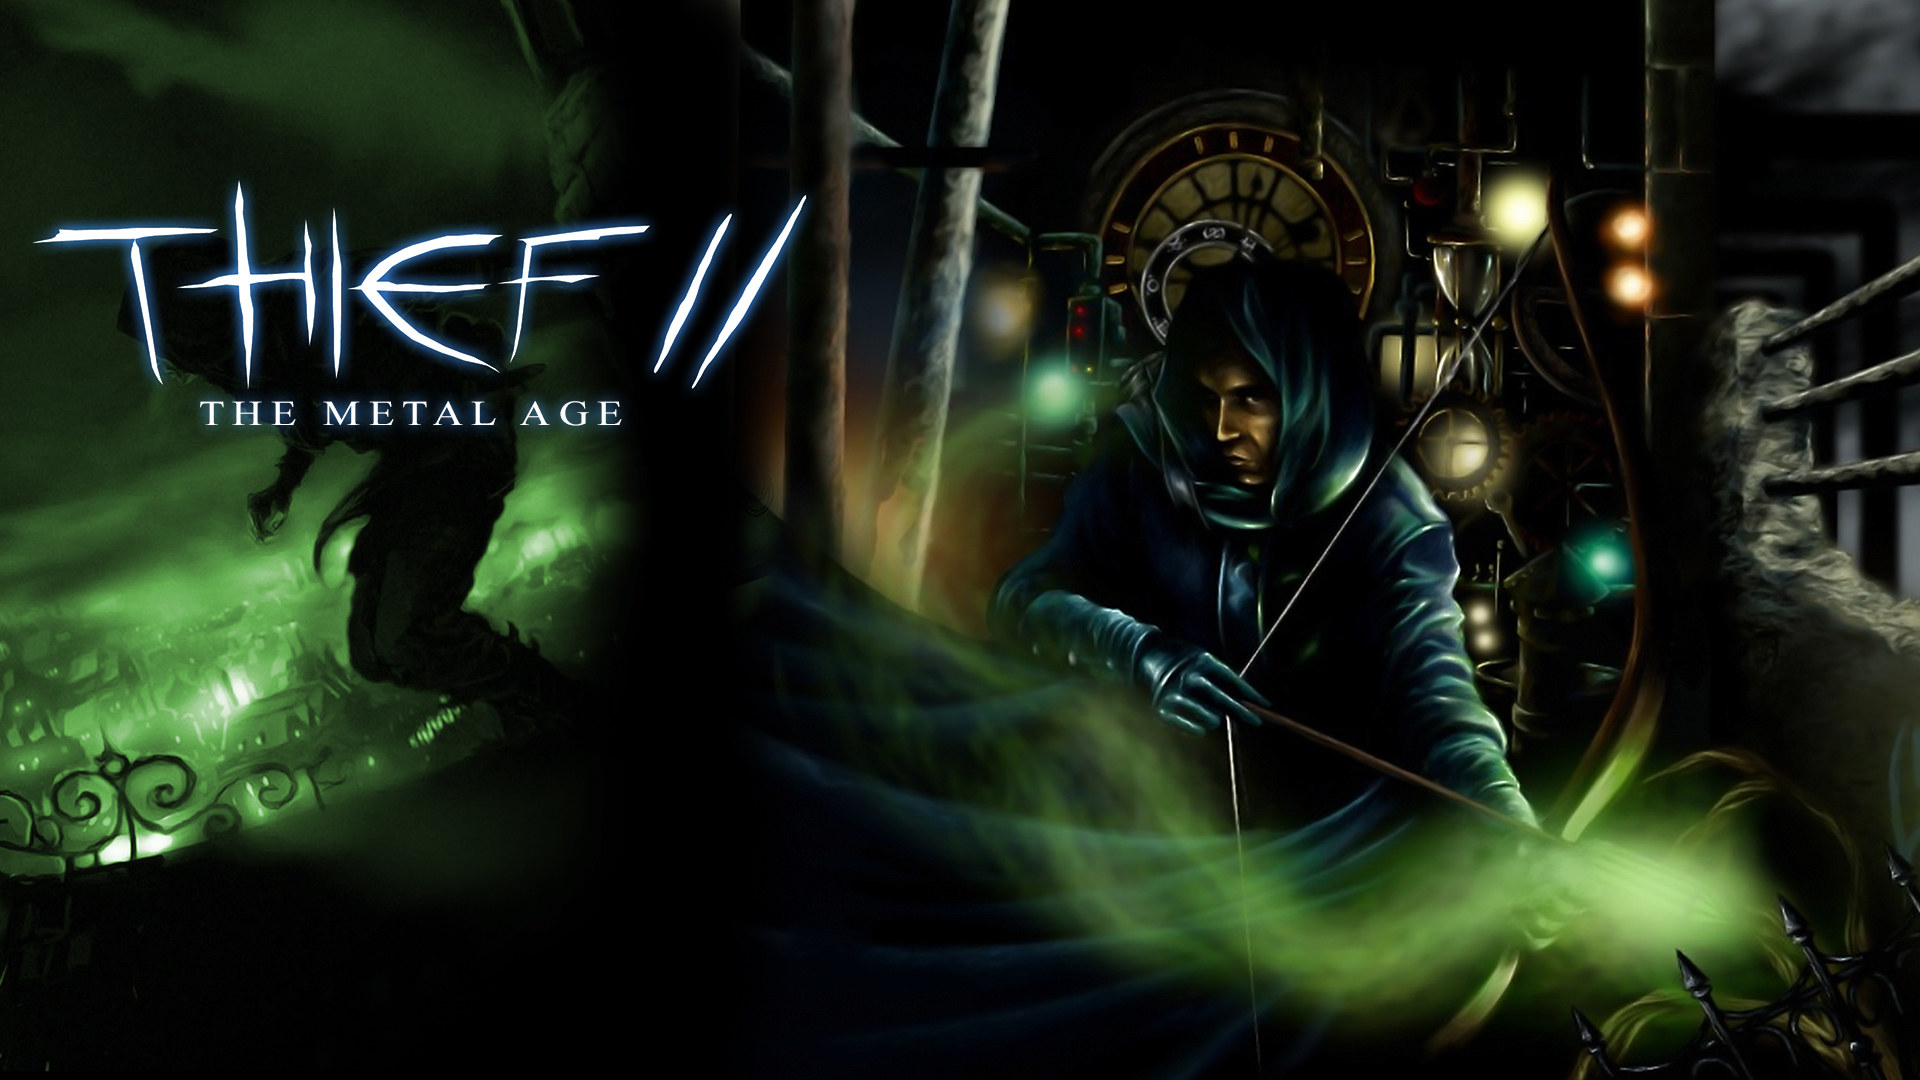 Thief Ii The Metal Age HD Wallpaper Background Image